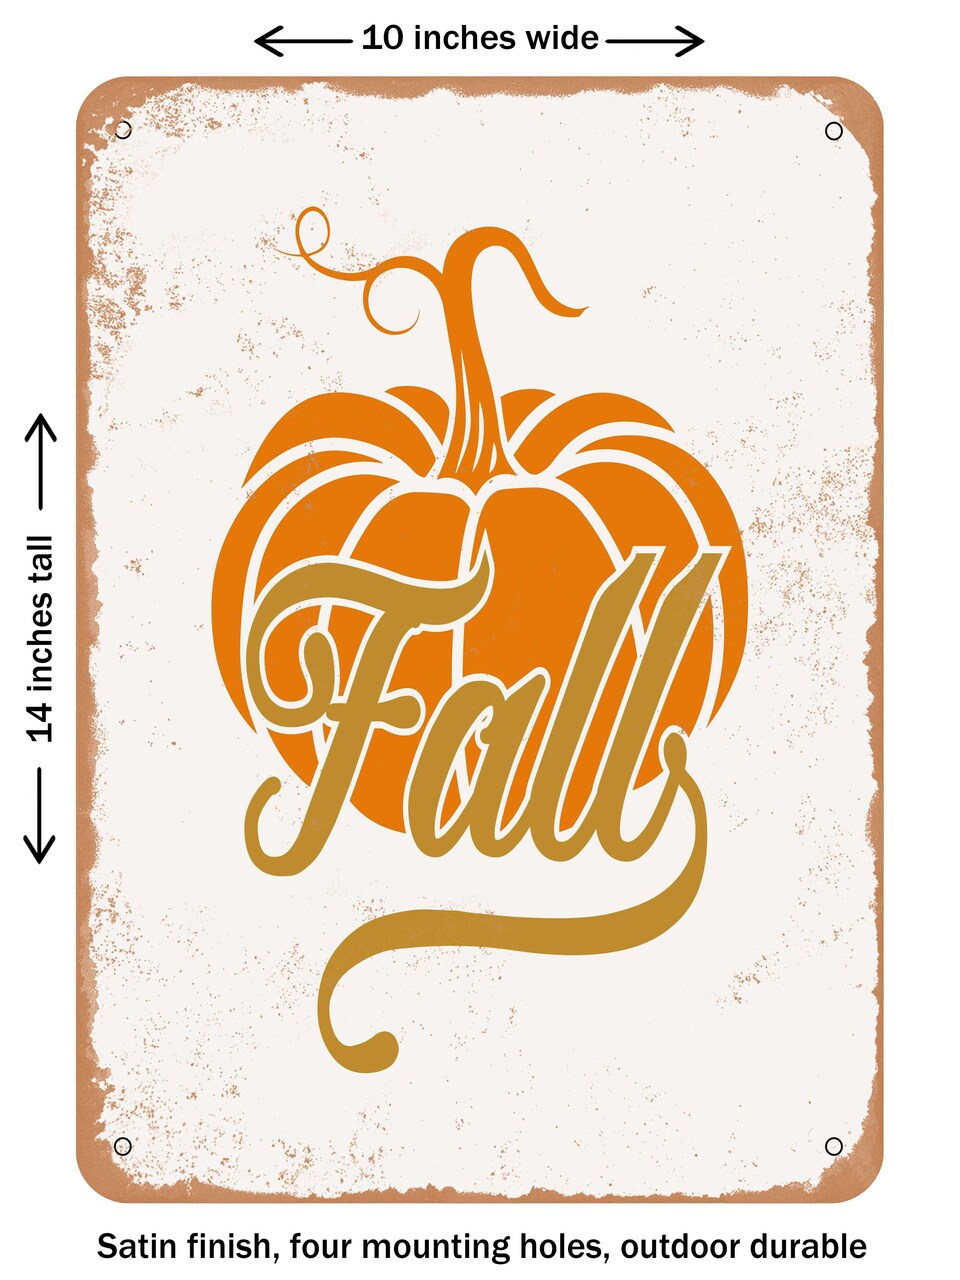 DECORATIVE METAL SIGN - Fall - 3  - Vintage Rusty Look